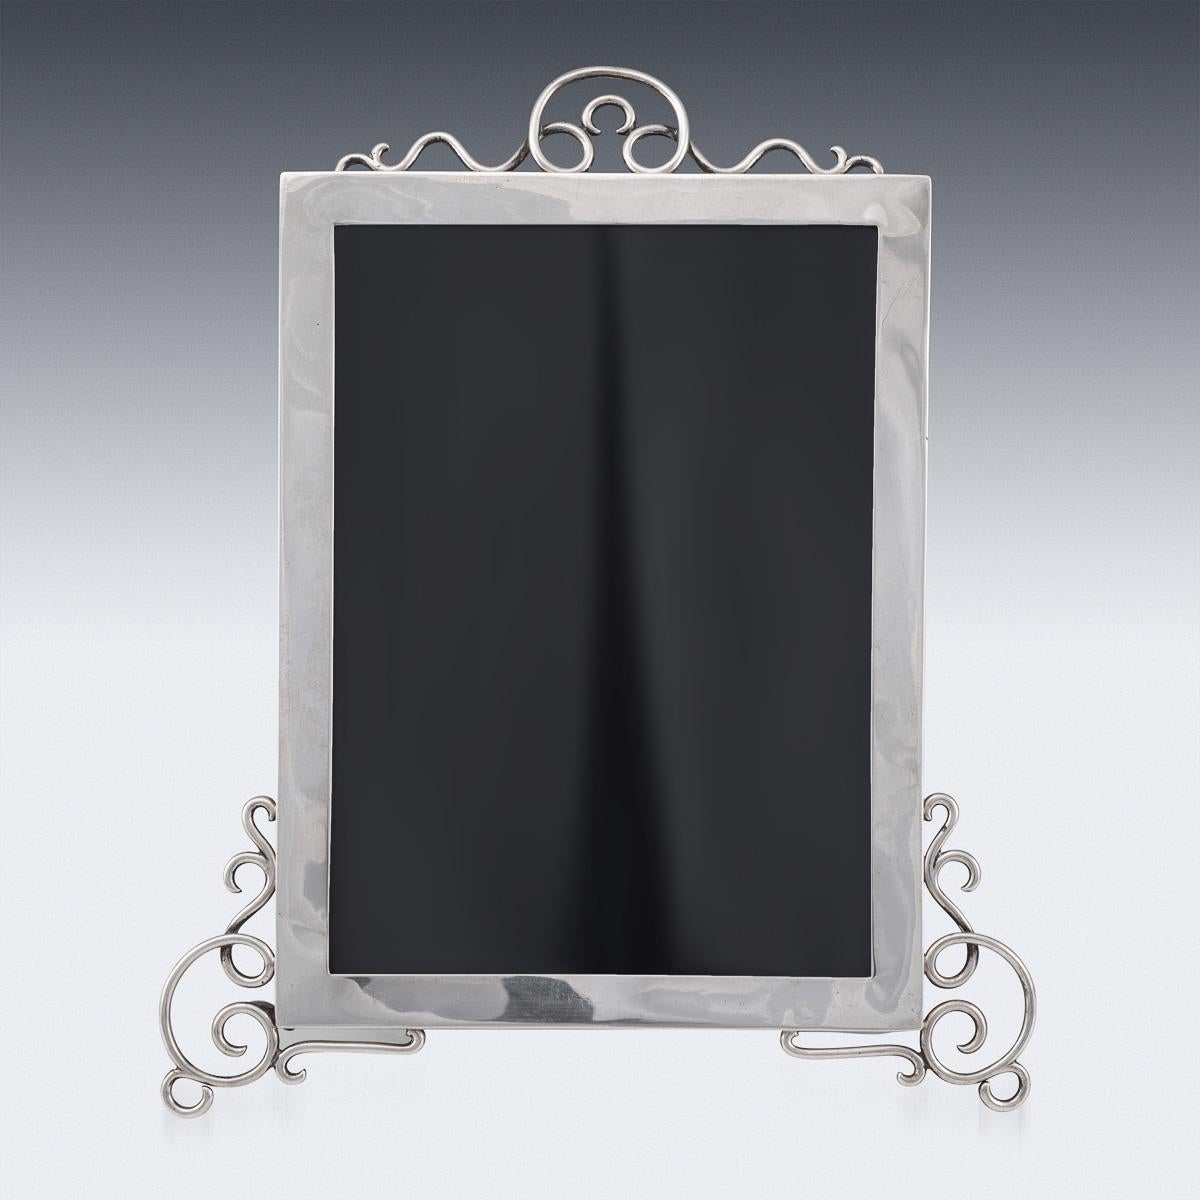 Antique early-20th century Edwardian solid silver photograph frame, of particularly large size, applied with scrolls and standing on scroll feet, mounted on a back with easel support, front with beveled glass to protect the photo. Hallmarked English